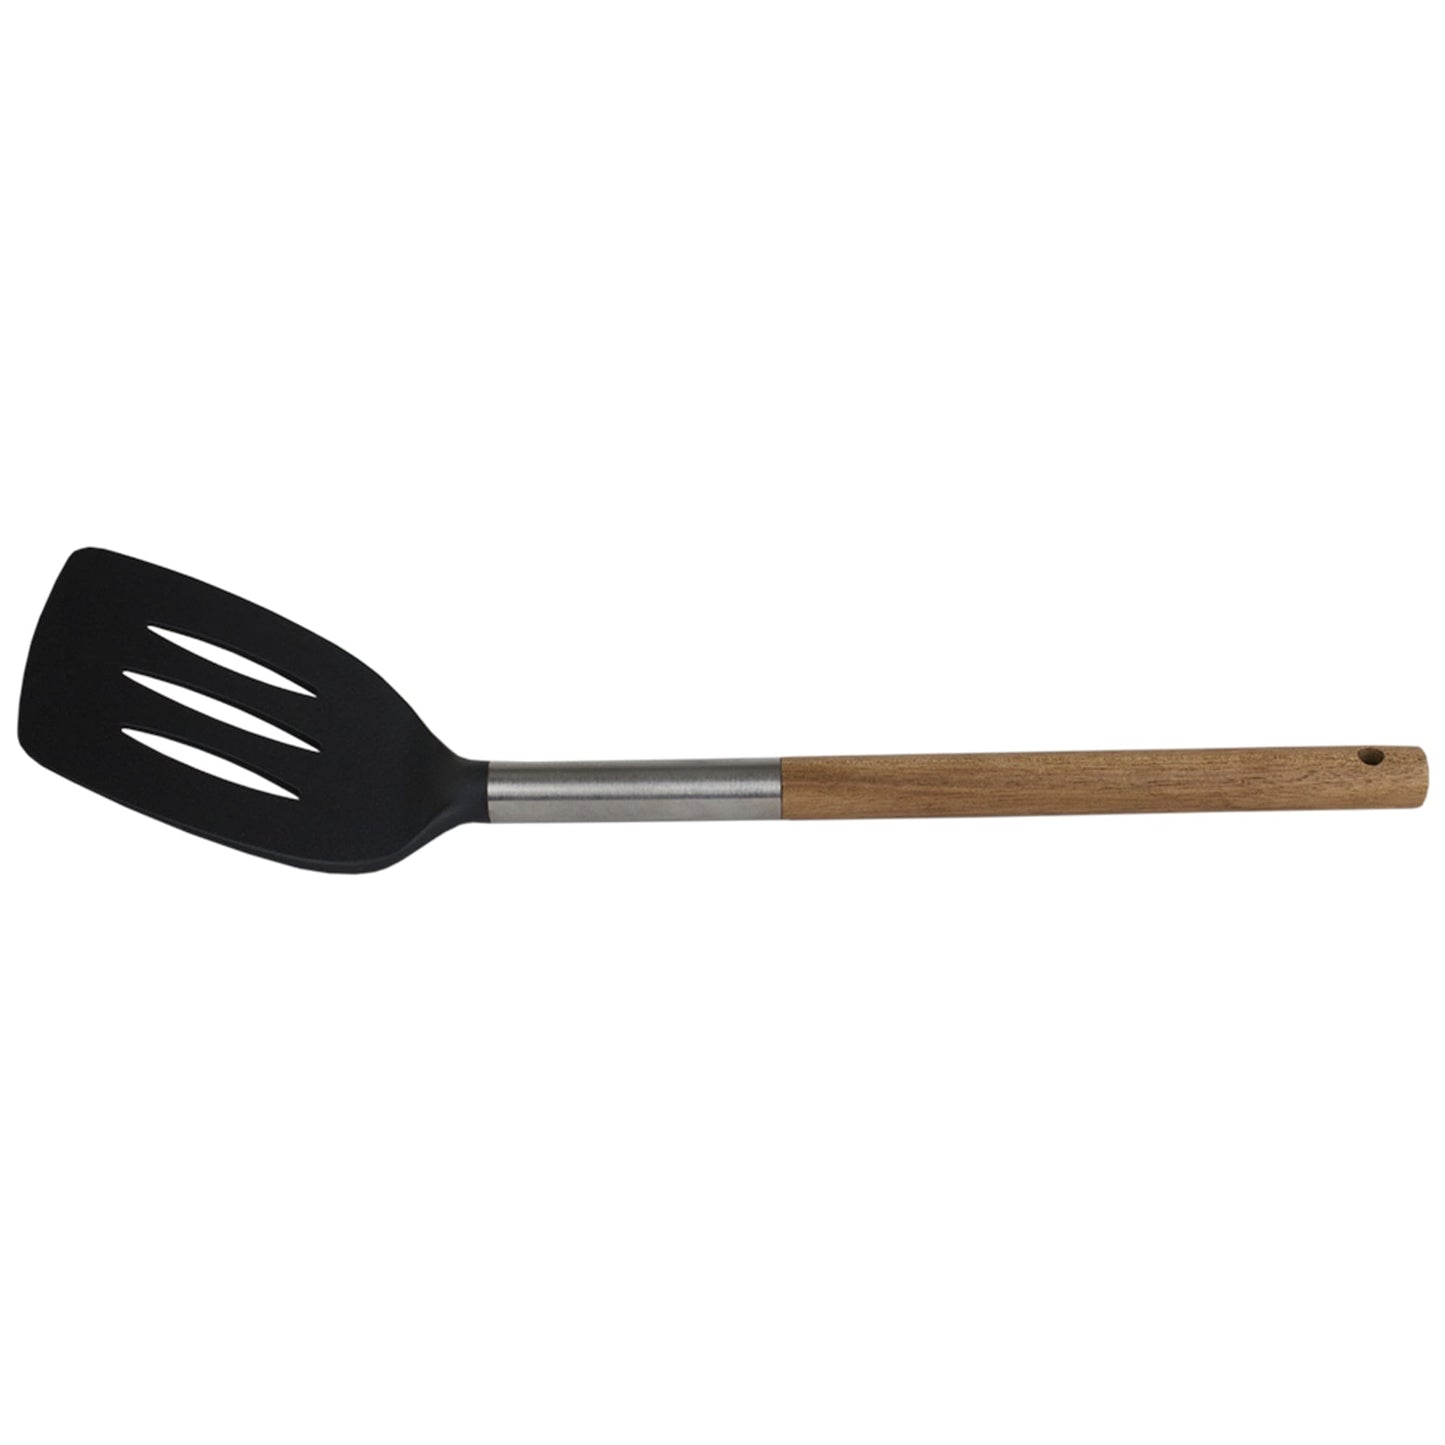 Winchester Collection Scratch-Resistant Rubber Slotted Spatula, Natural